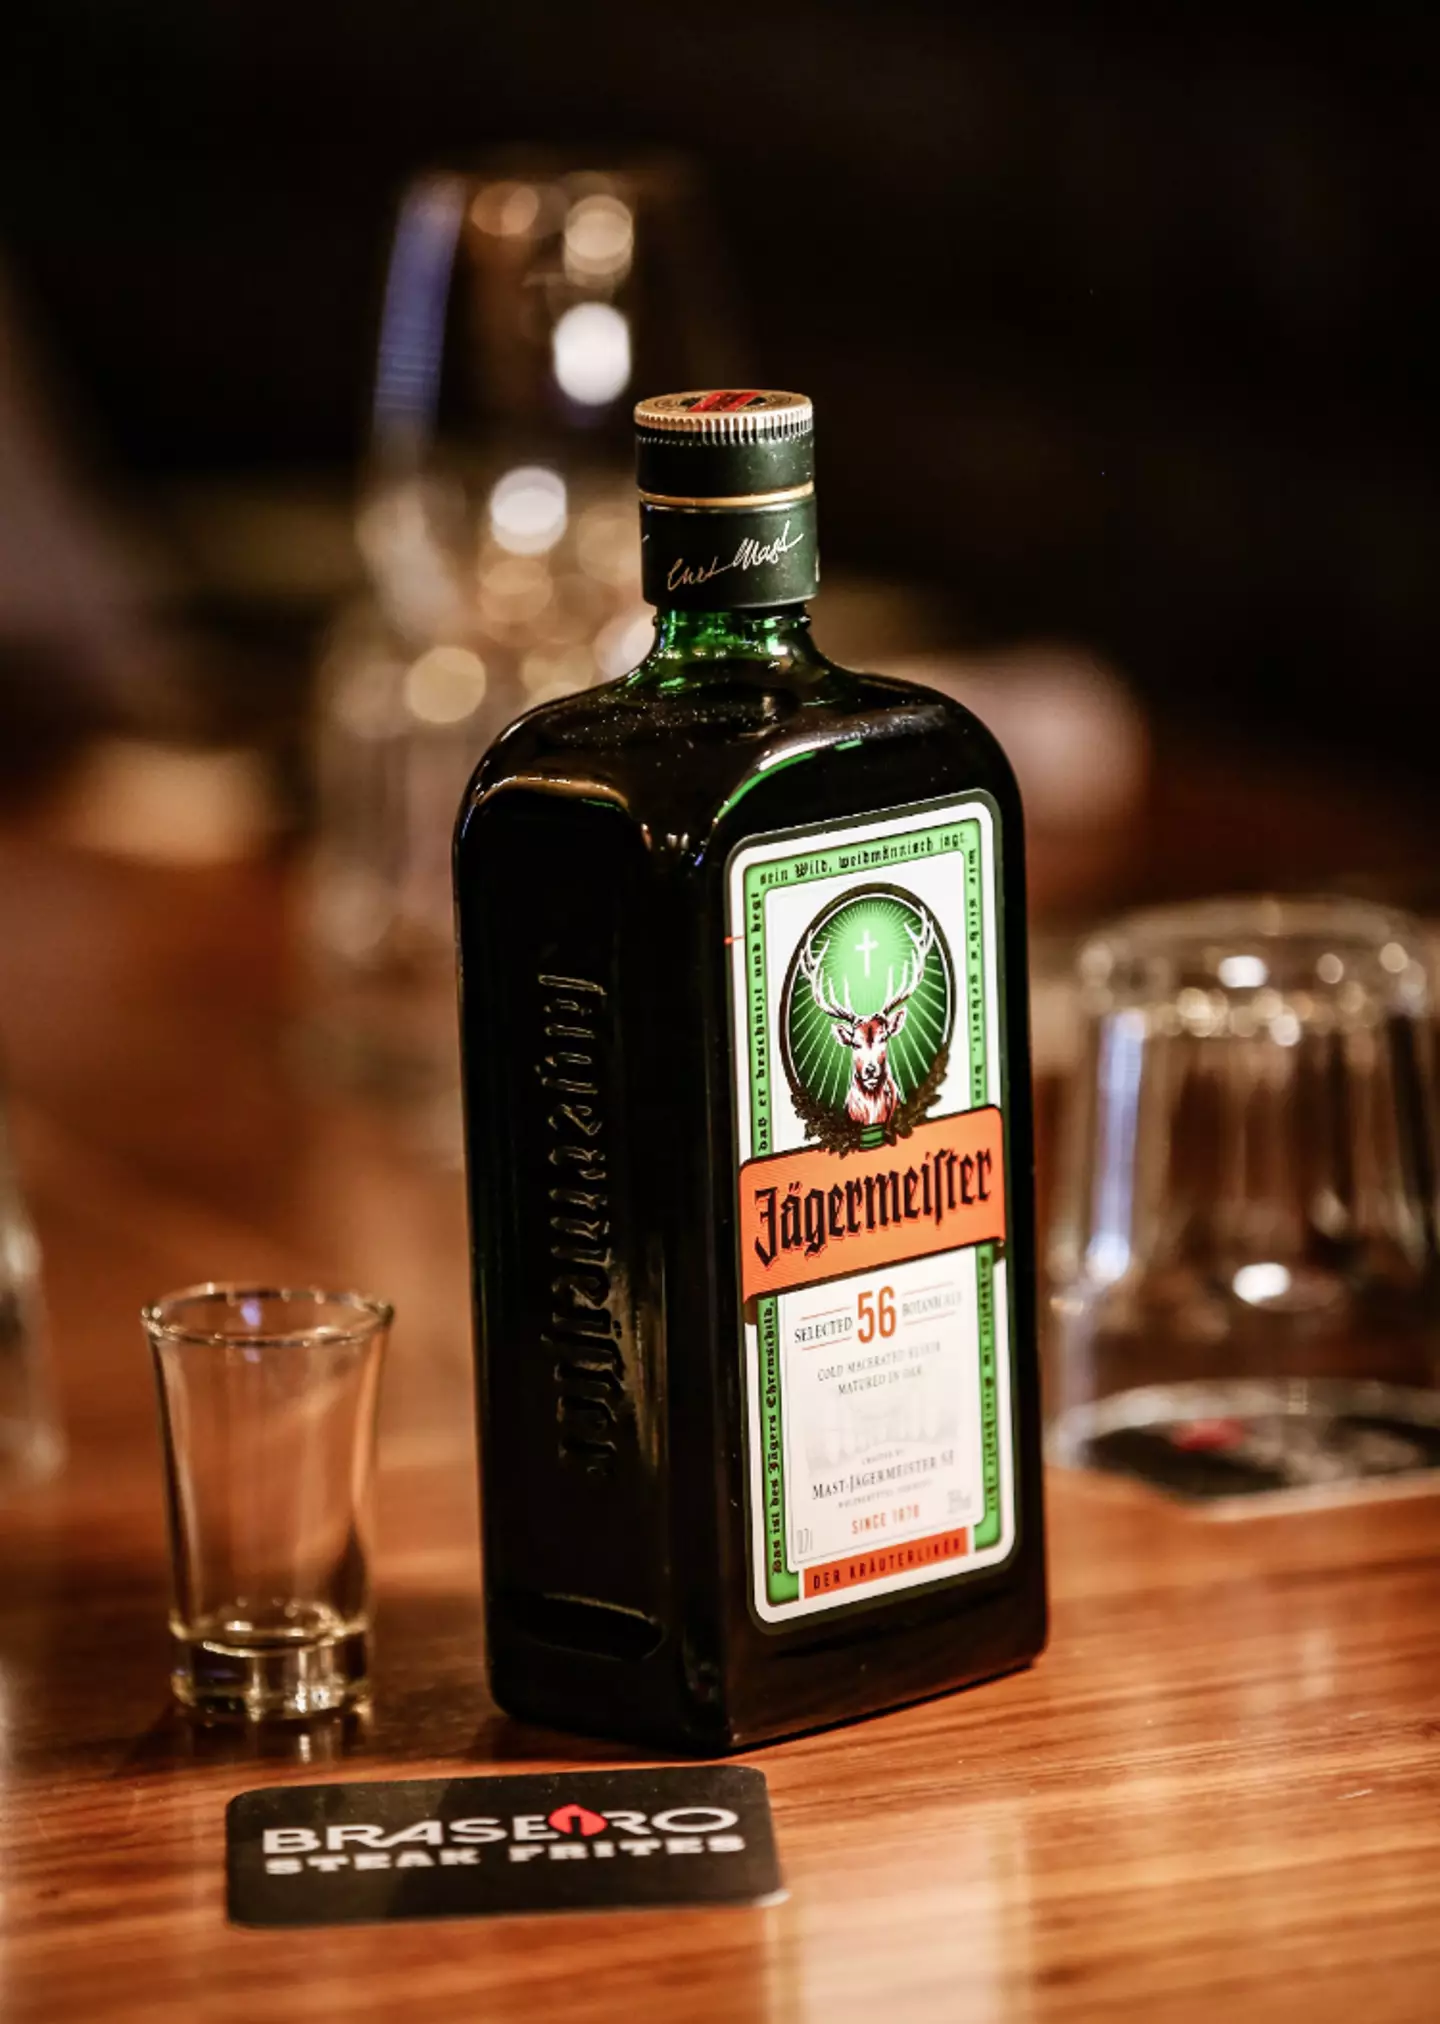 Researchers have found that drinking jägerbombs can elicit a response similar to cocaine.